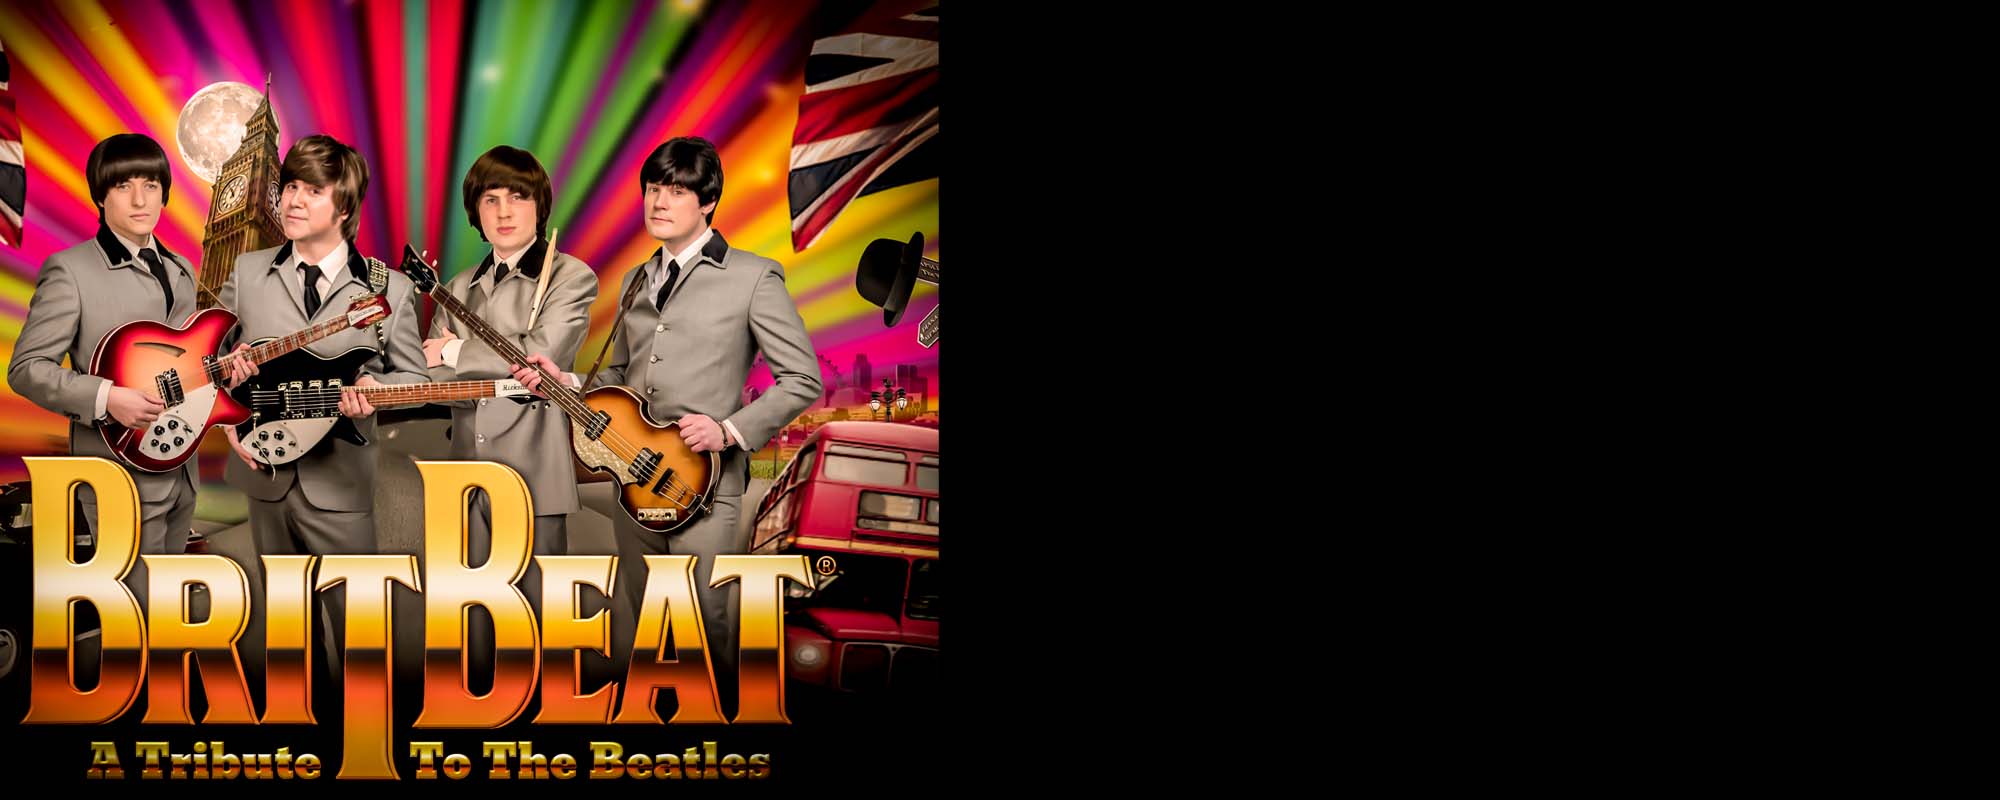 britbeat-a-tribute-to-the-beatles